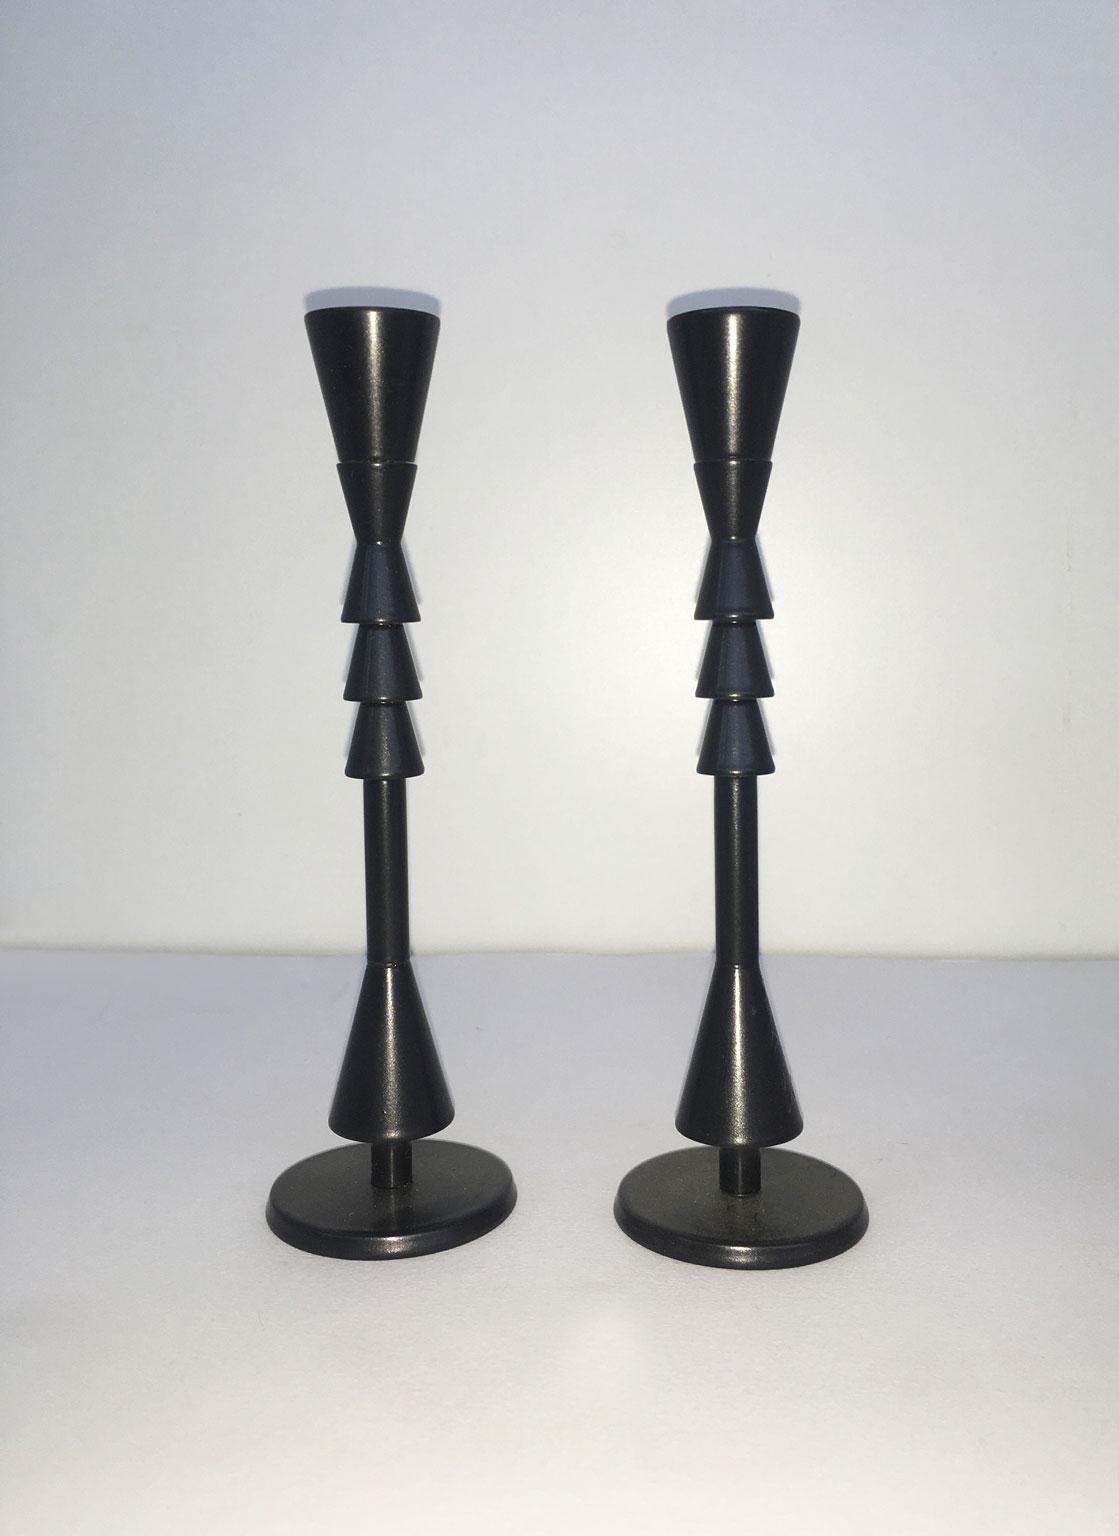 This artwork is a multiples limited not numbered specimens created by the Italian artist Ugo La Pietra, a well known Internationally artist. The pieces are useful as candleholders.

Ugo La Pietra was born in Bussi Sul Tirino (Italy) in 1938.